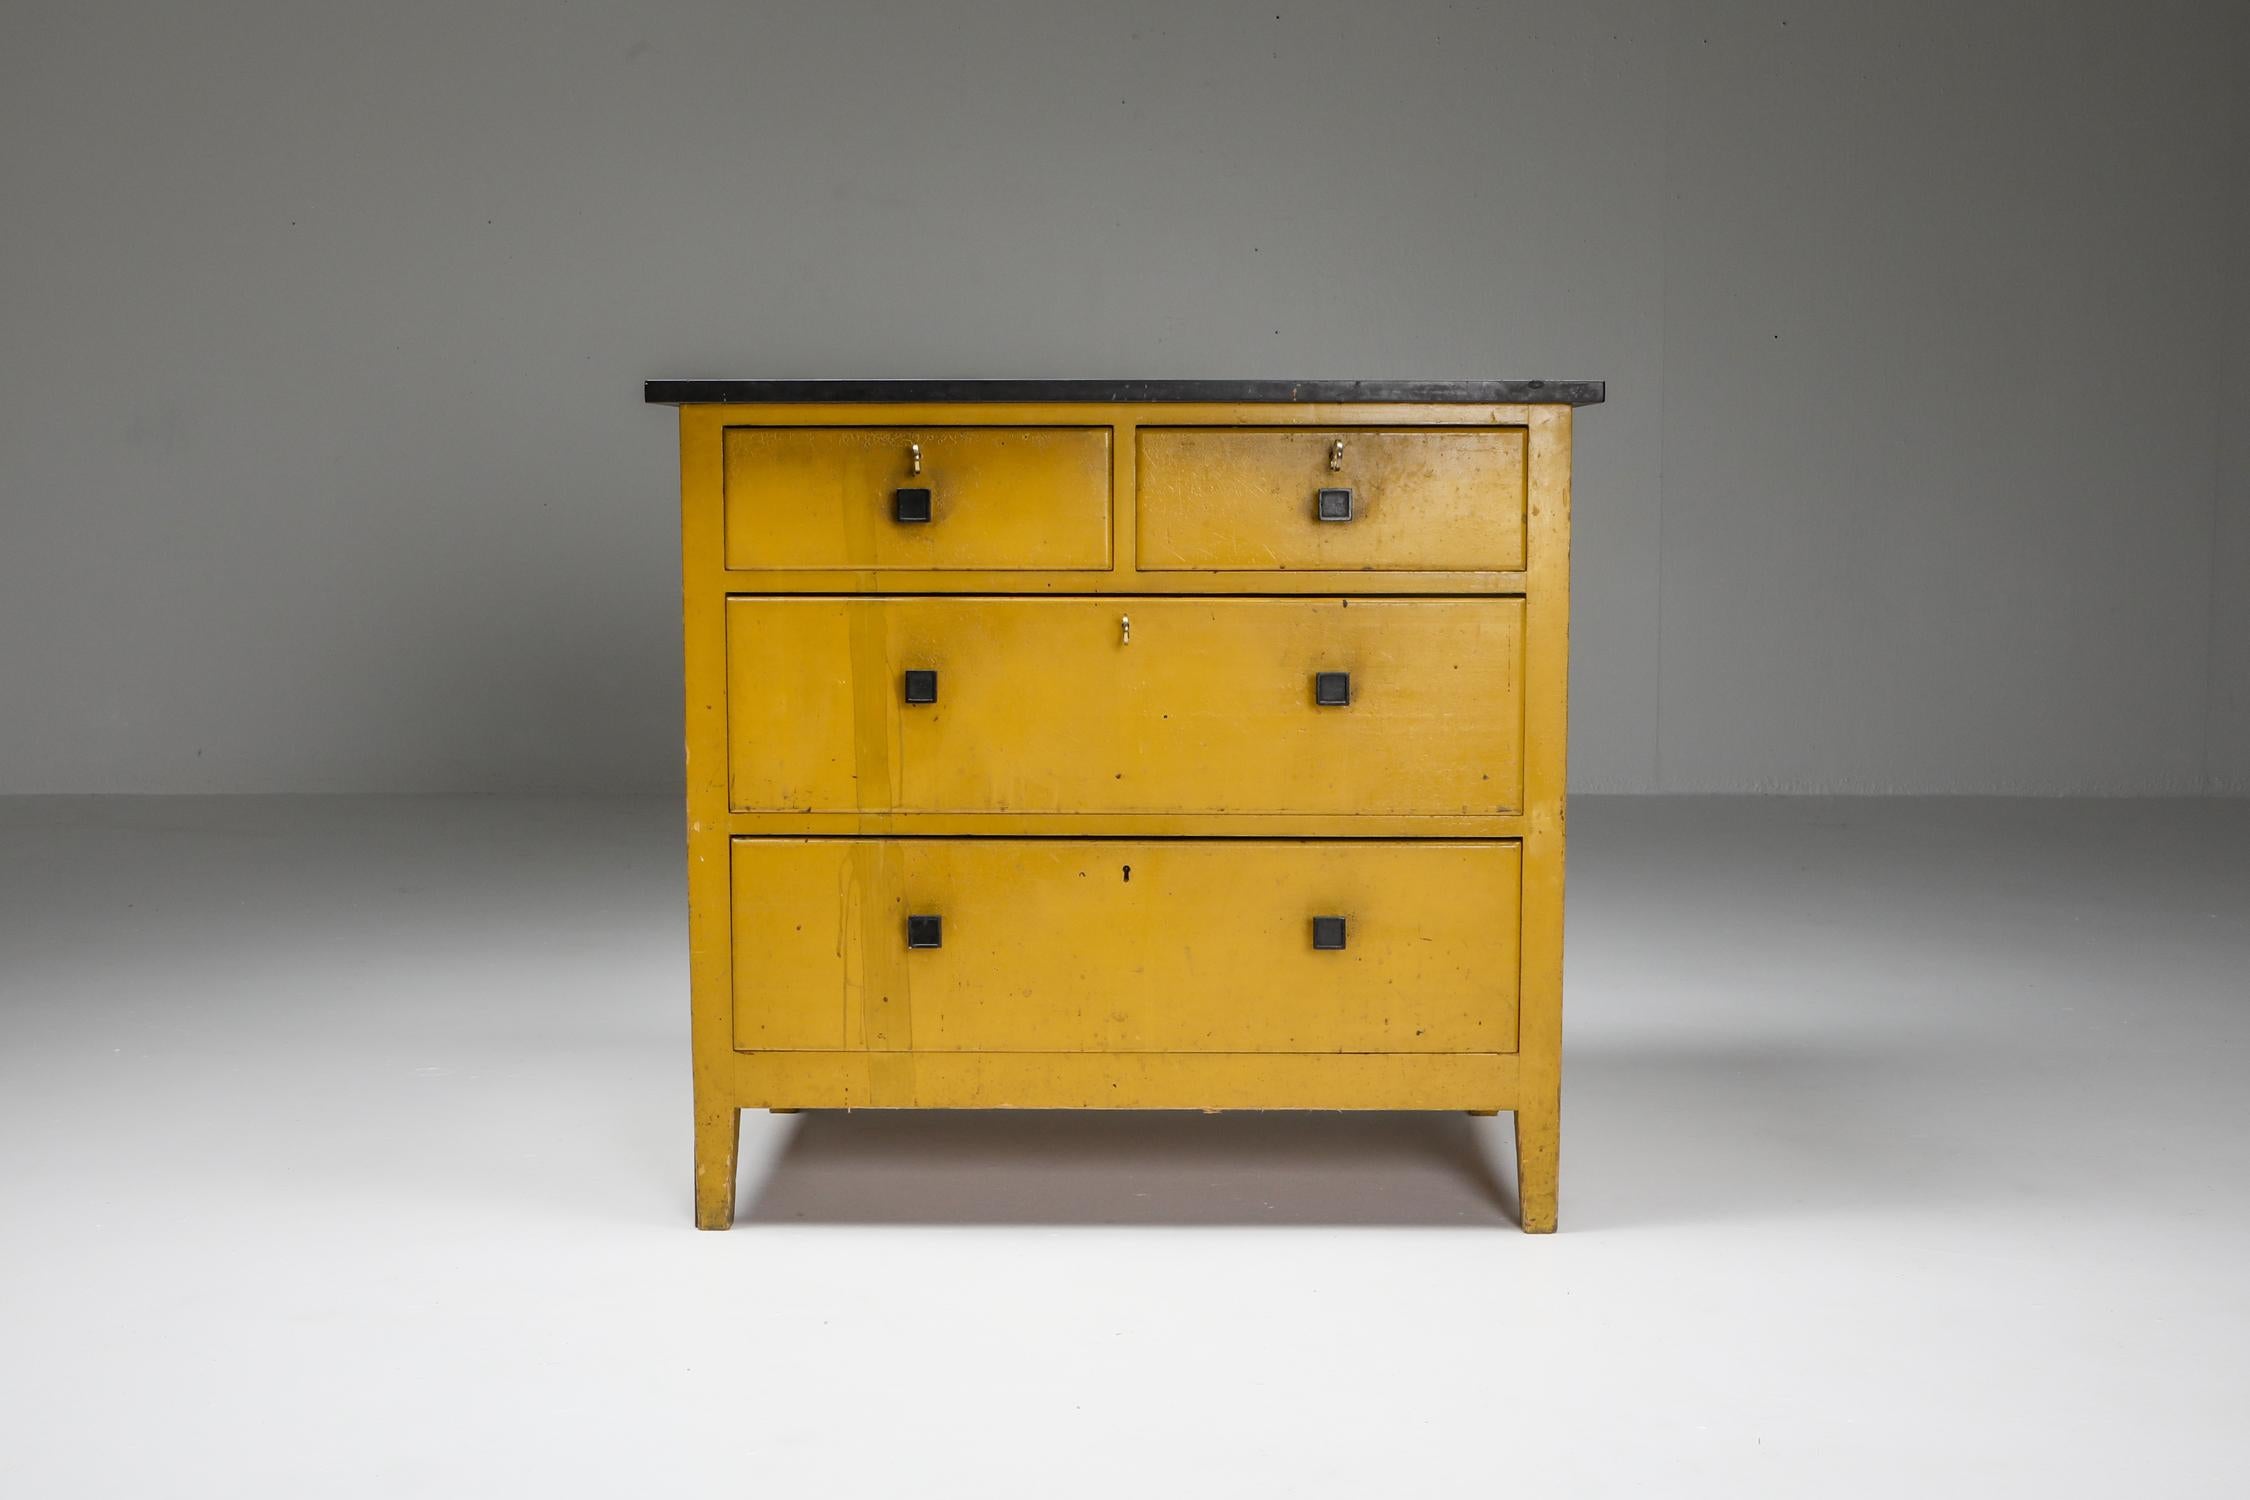 Modernist Yellow chest of drawers, Hendrik Wouda, H. Pander & Zonen, Netherlands, 1924.

Painted pine, black marble top.

The Interbellum, the period between the two World Wars, was a time when culture Dutch blossomed. Architects, designers and